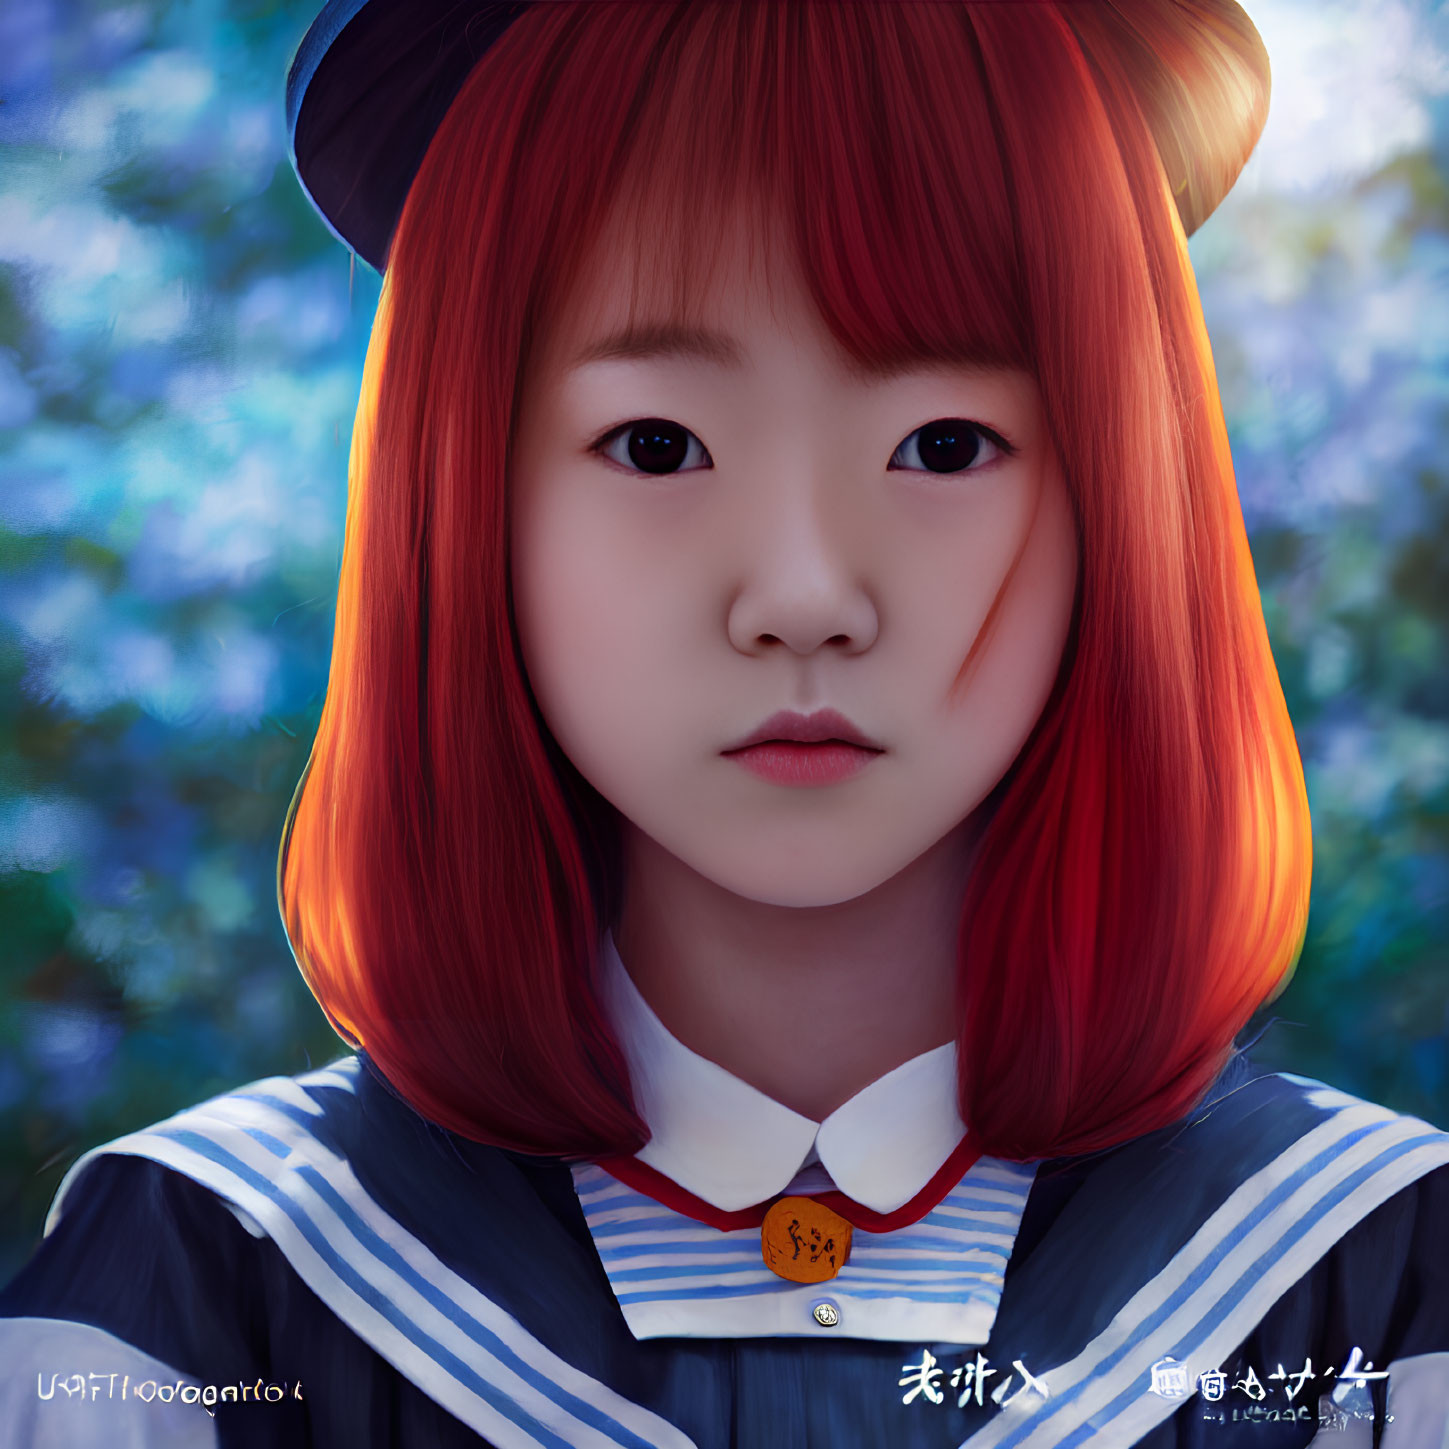 Red-haired girl in sailor school uniform on blue floral backdrop